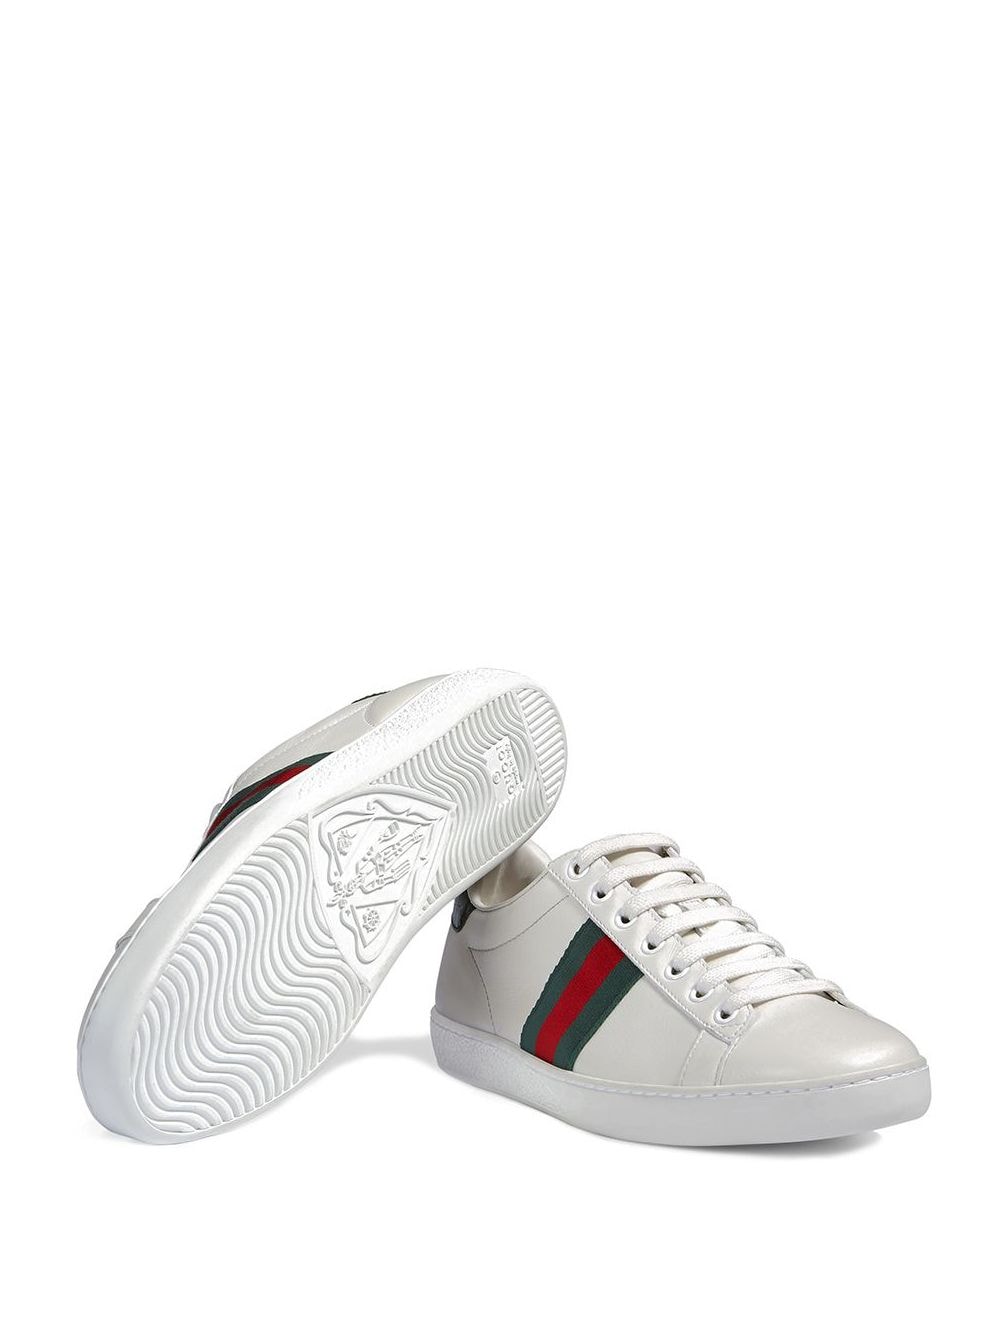 Gucci White Ace Leather Sneakers - Farfetch